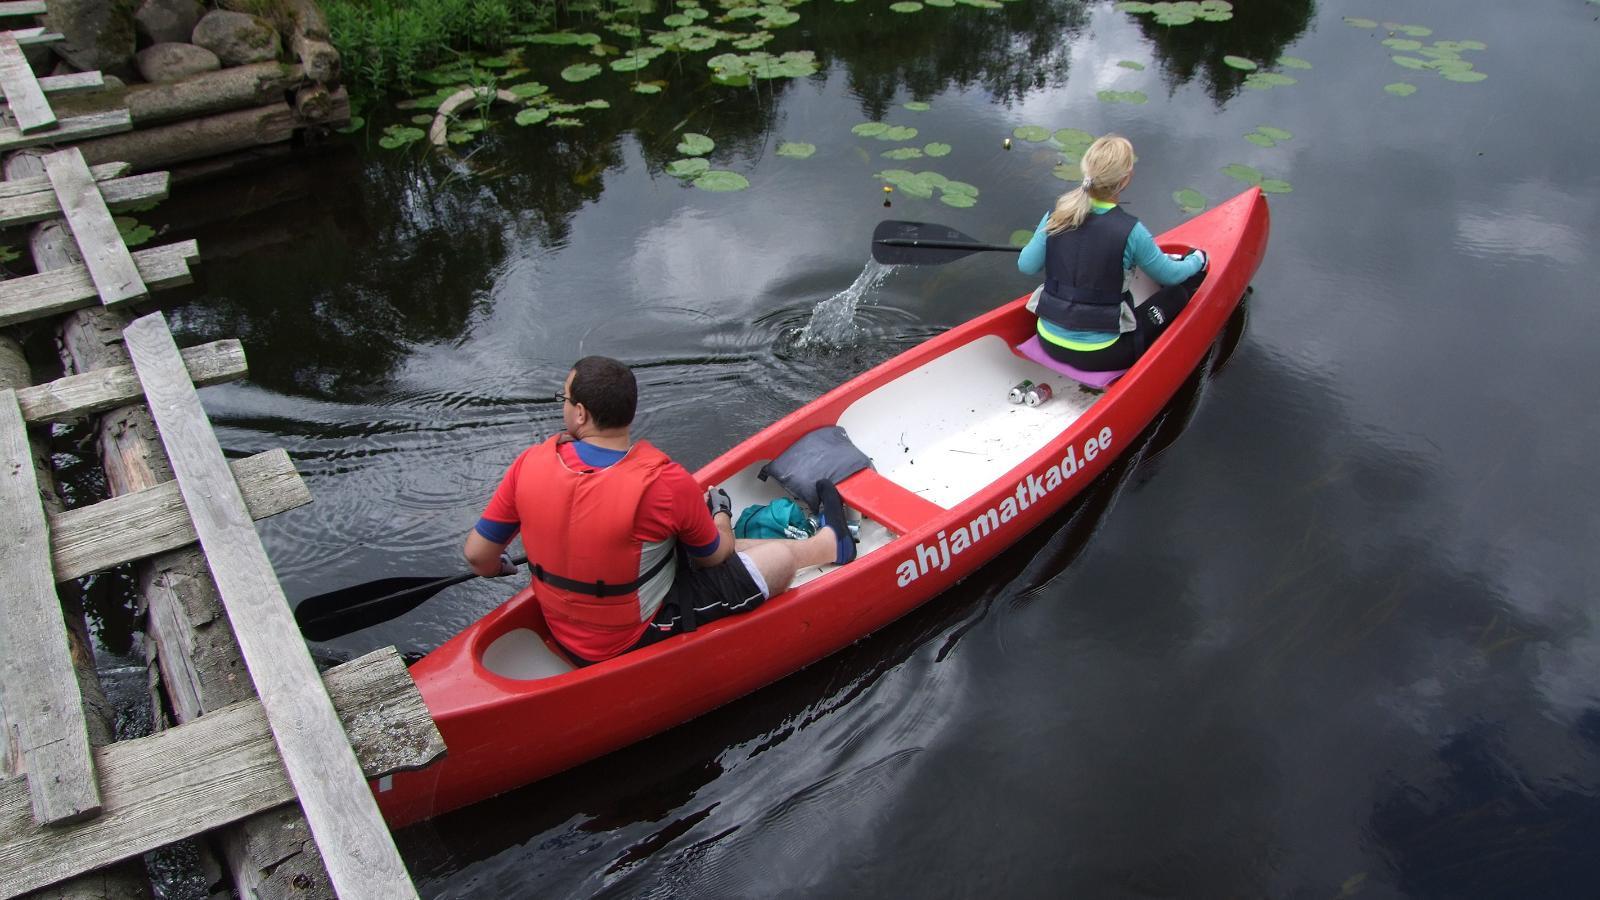 On a canoe in the "jungle" of the River Kõpu